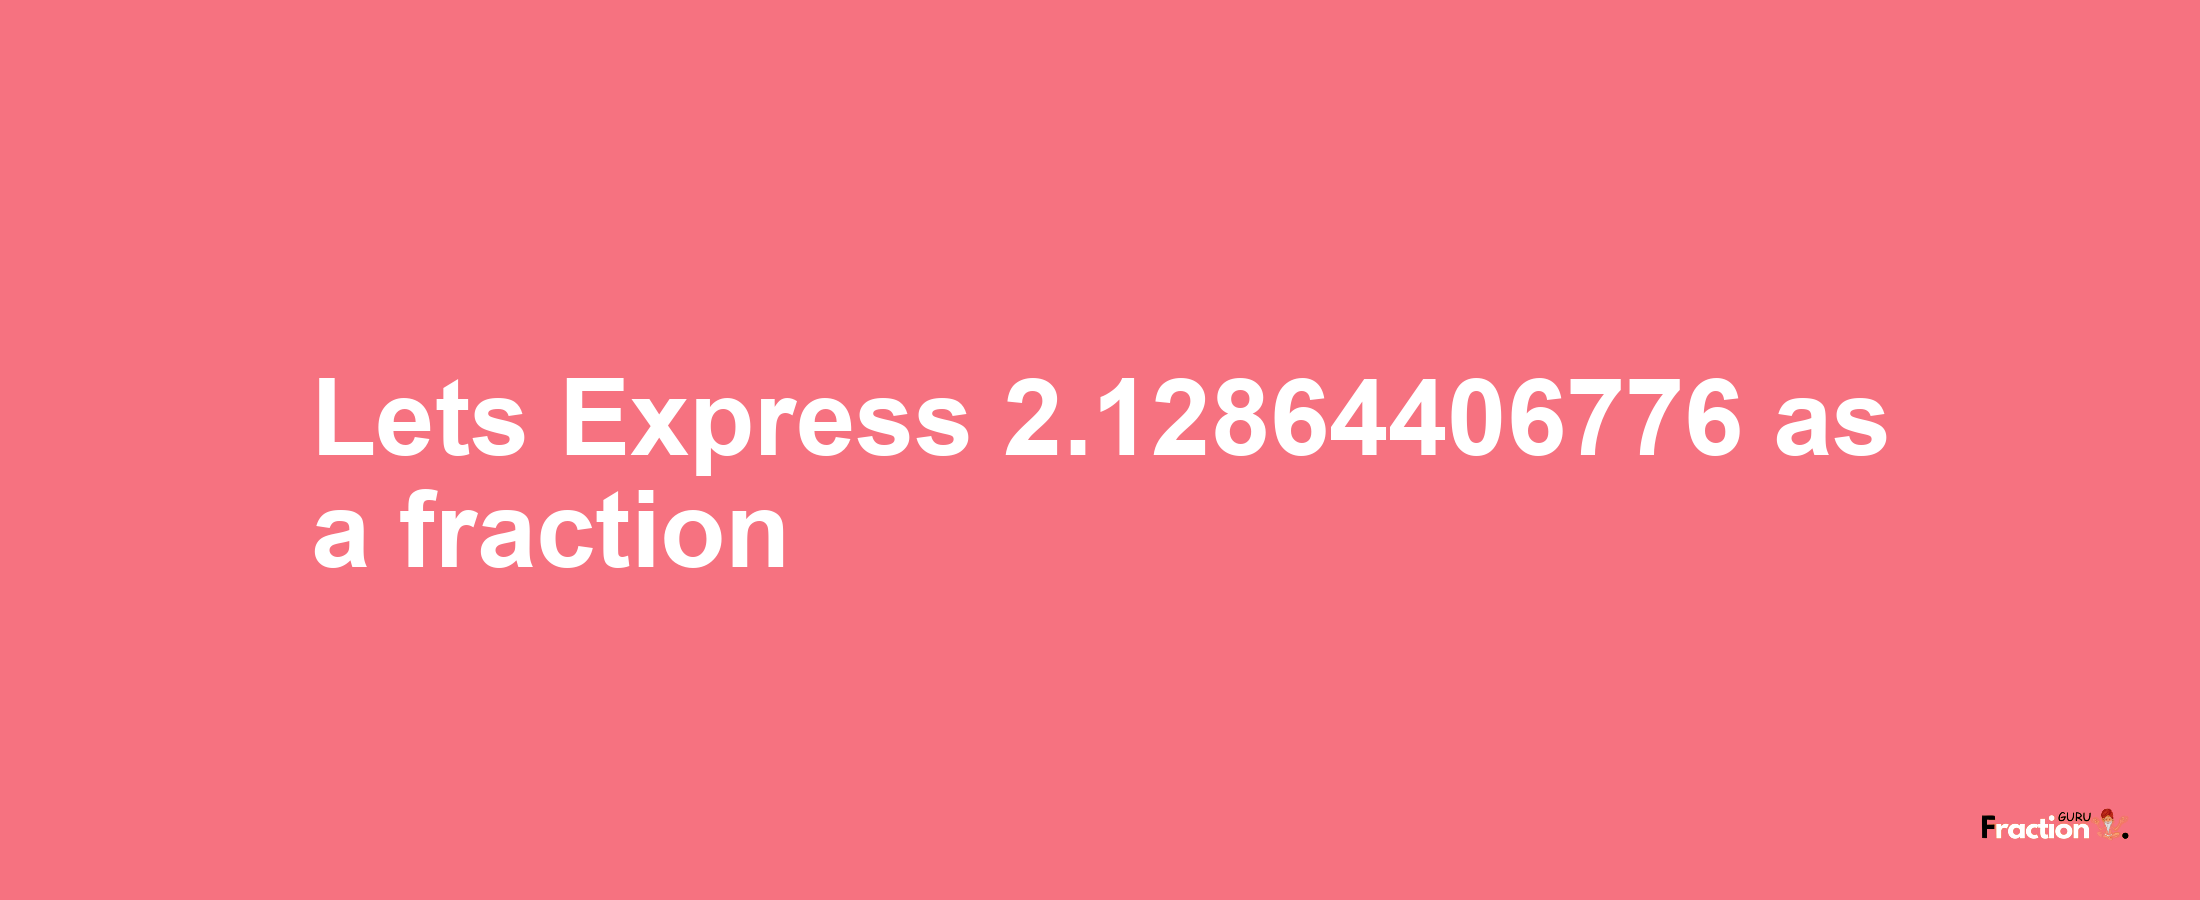 Lets Express 2.12864406776 as afraction